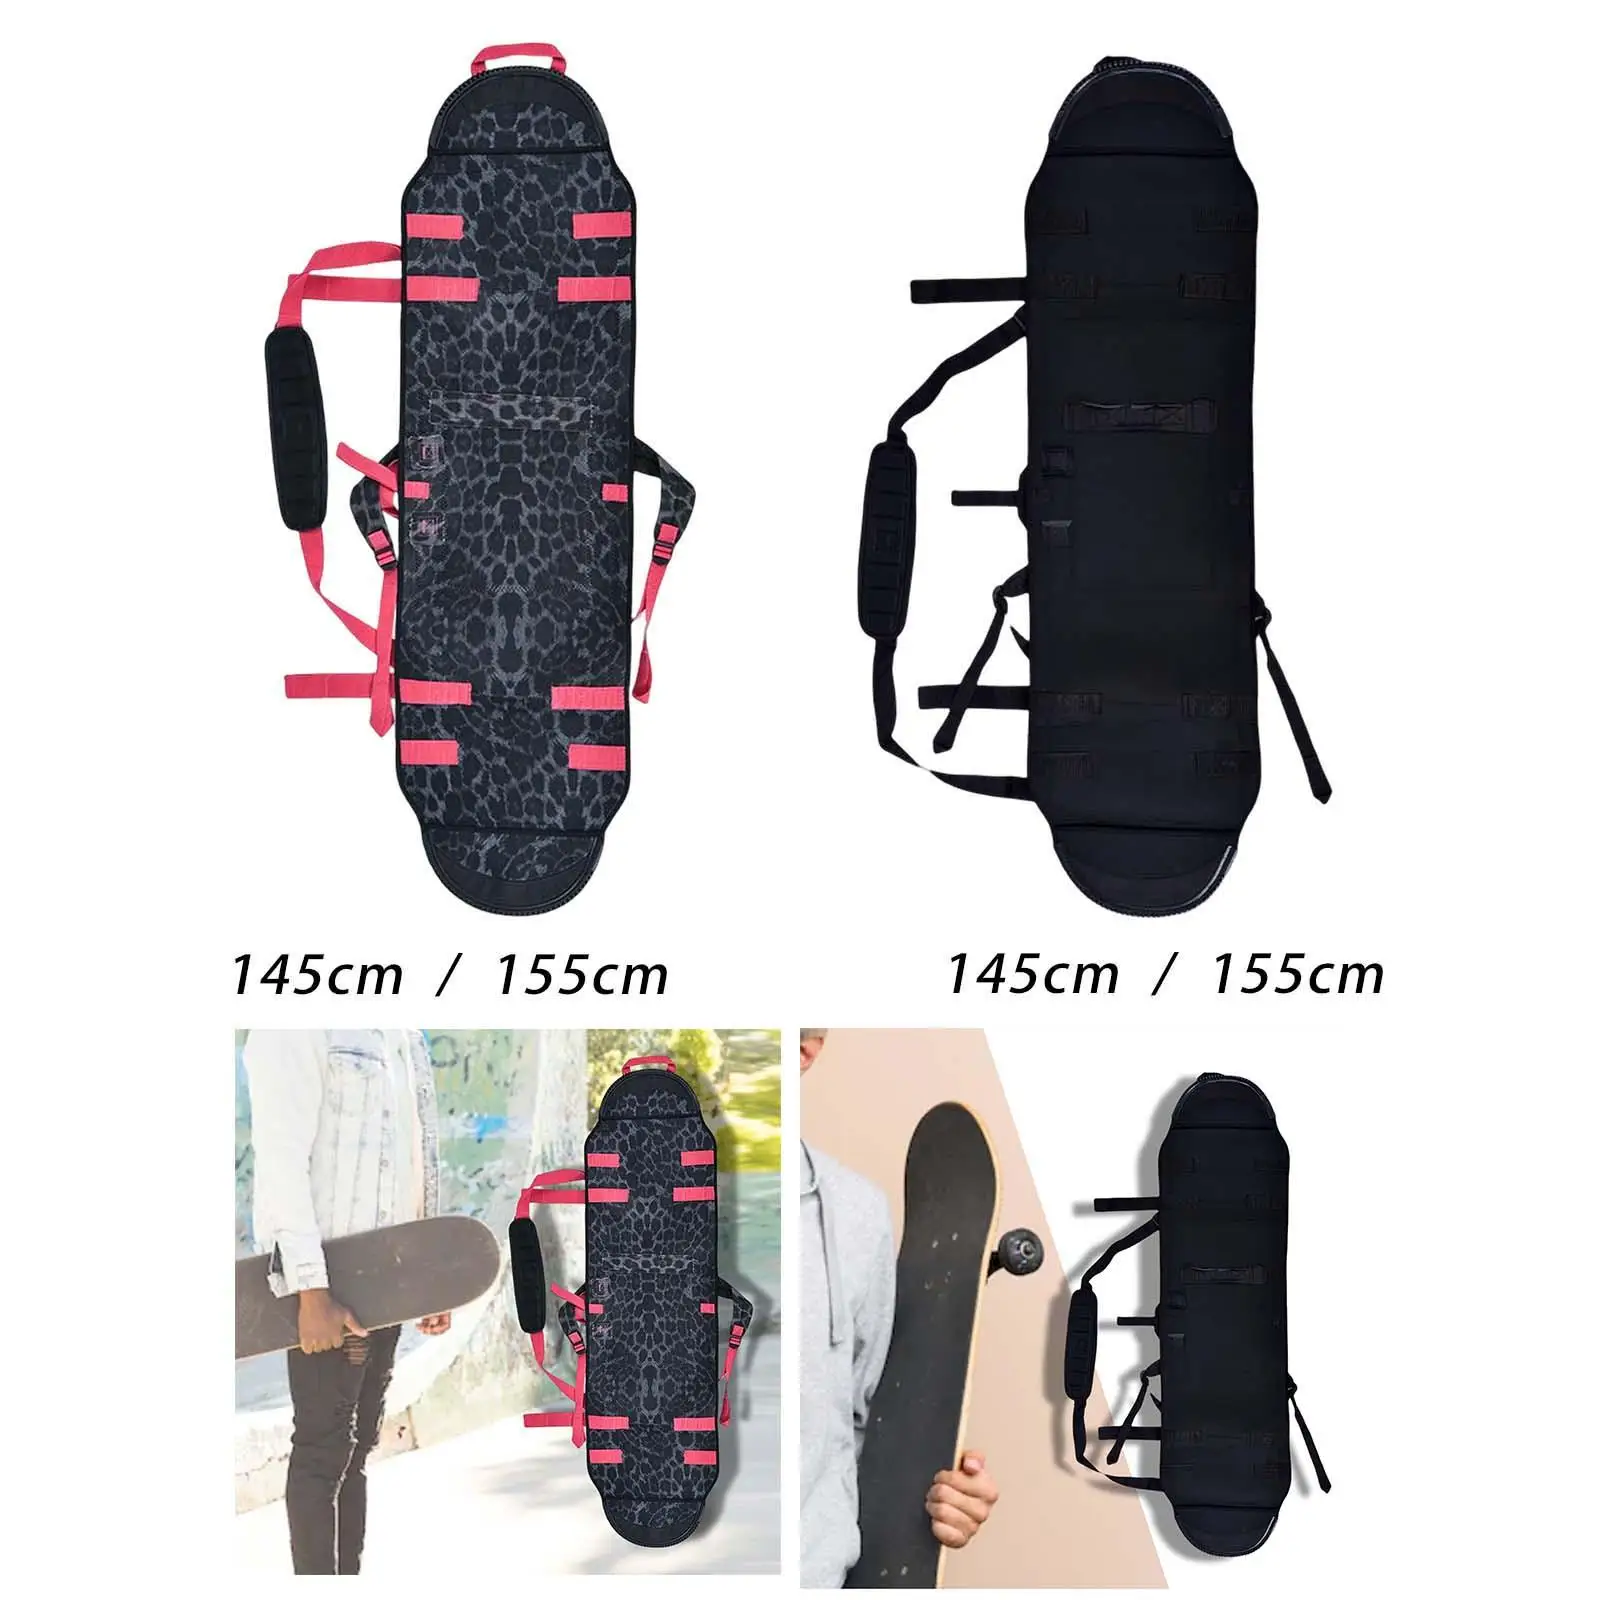 Ski Storage Bag Carry Protective Wrap Snowboard Sleeve Cover Case for Training Unisex